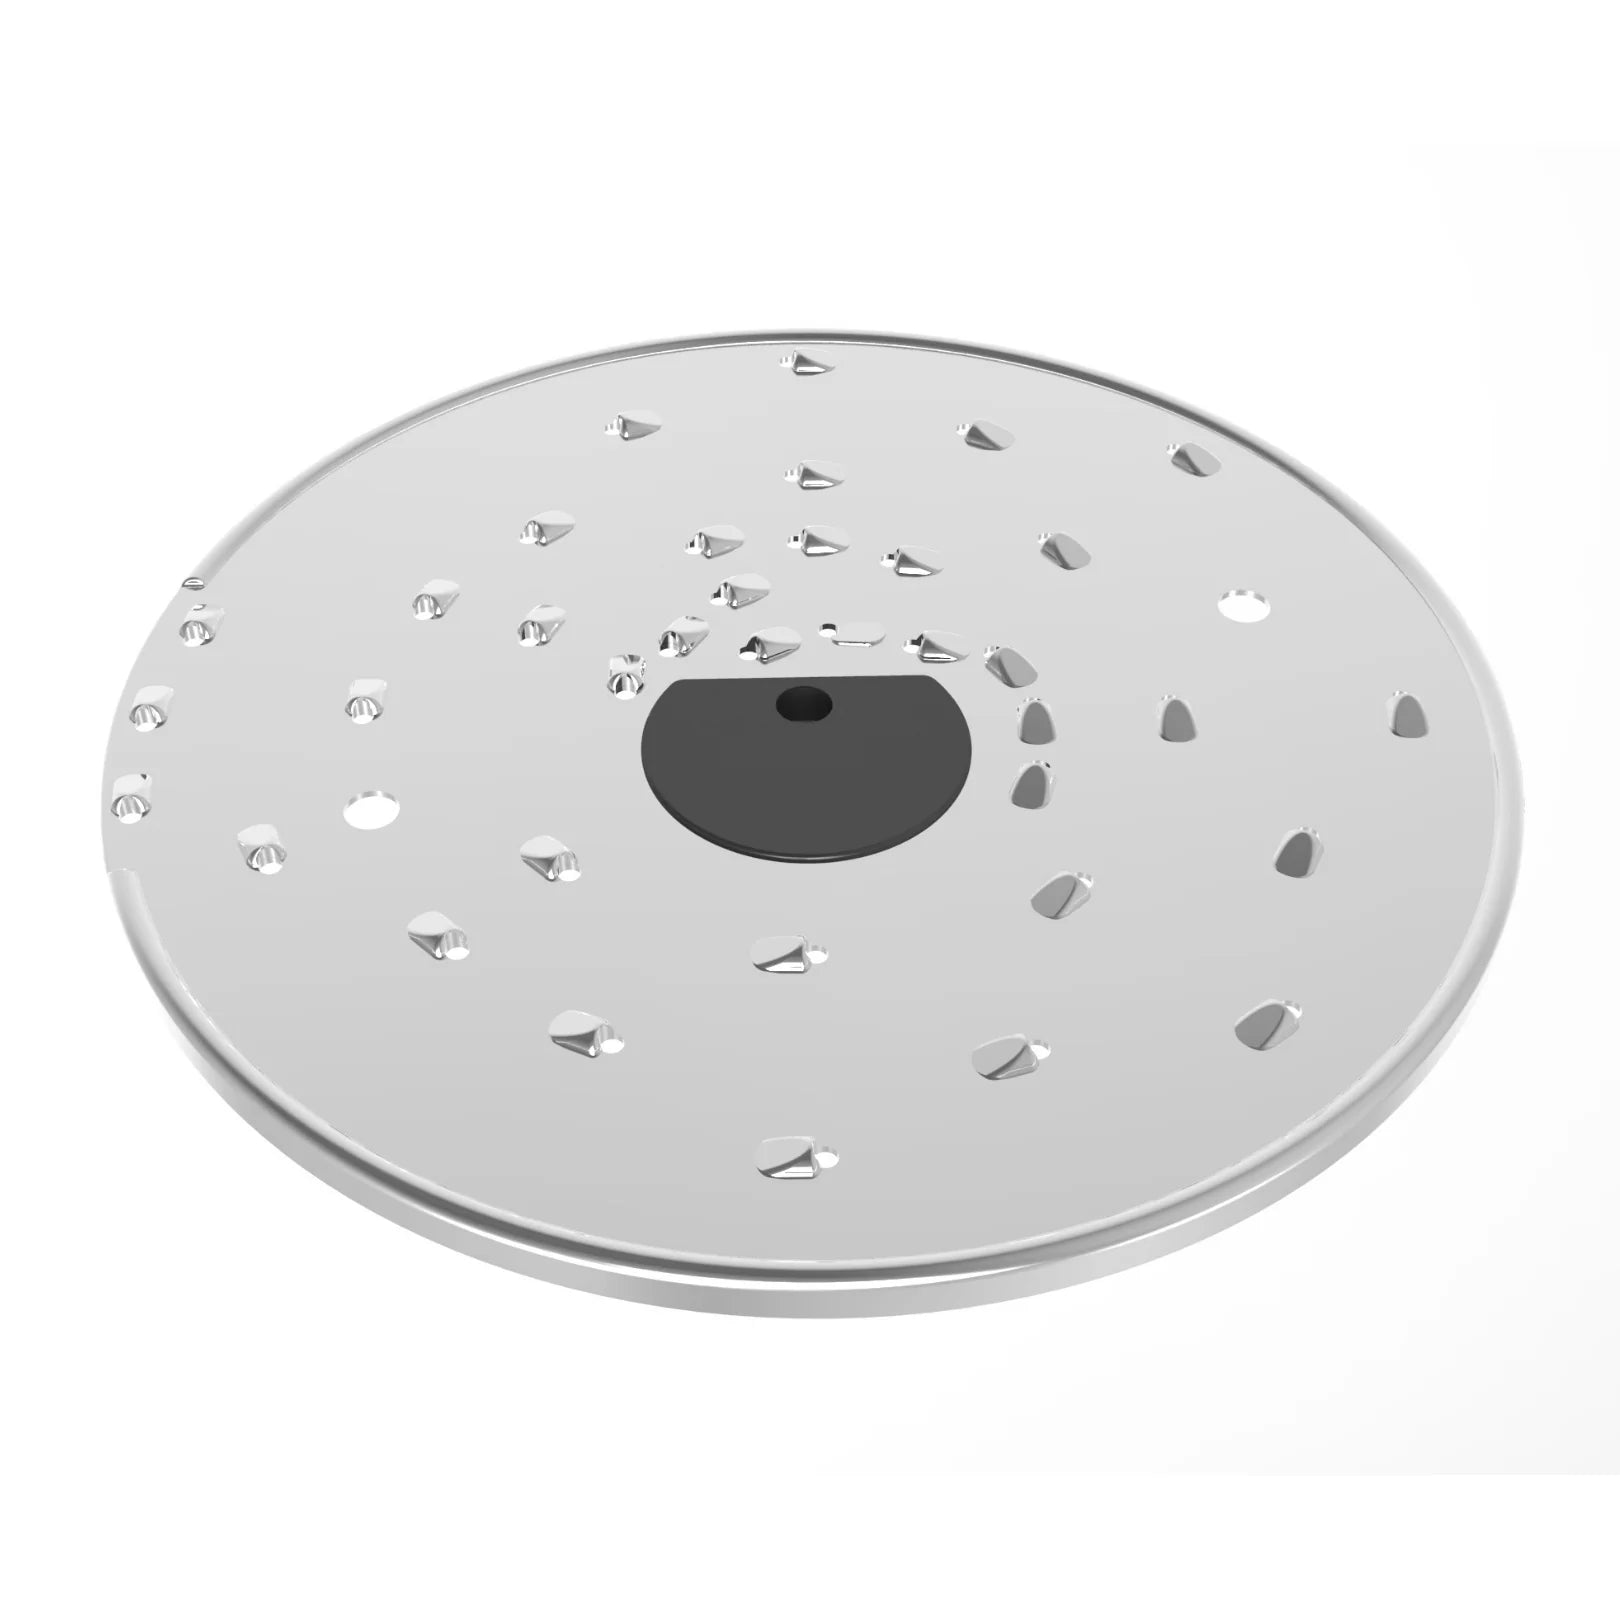 Grating disc for the magimix food processor